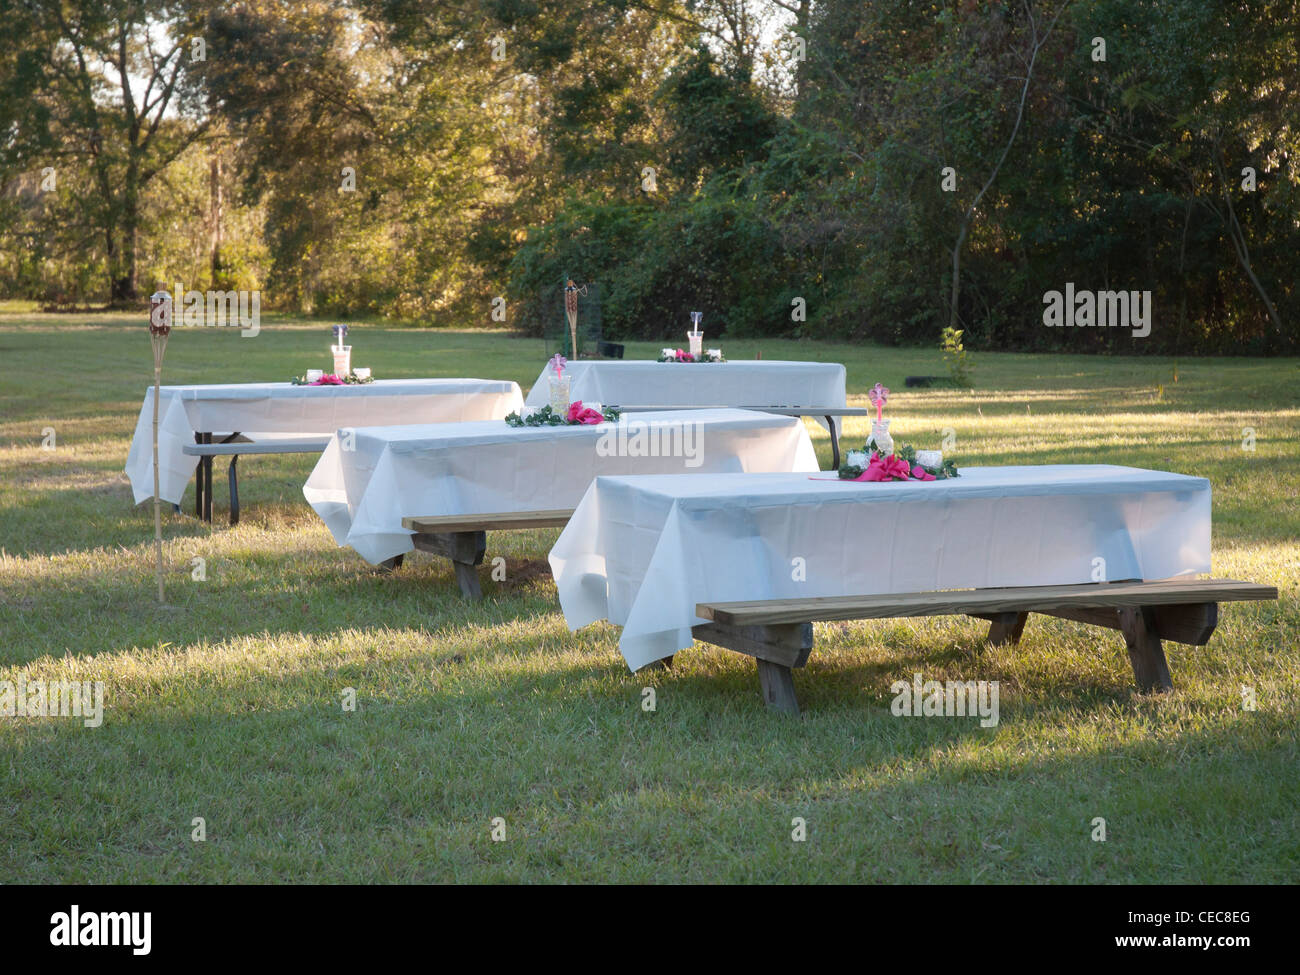 Picnic tables decorated for an outdoor wedding celebration. Stock Photo